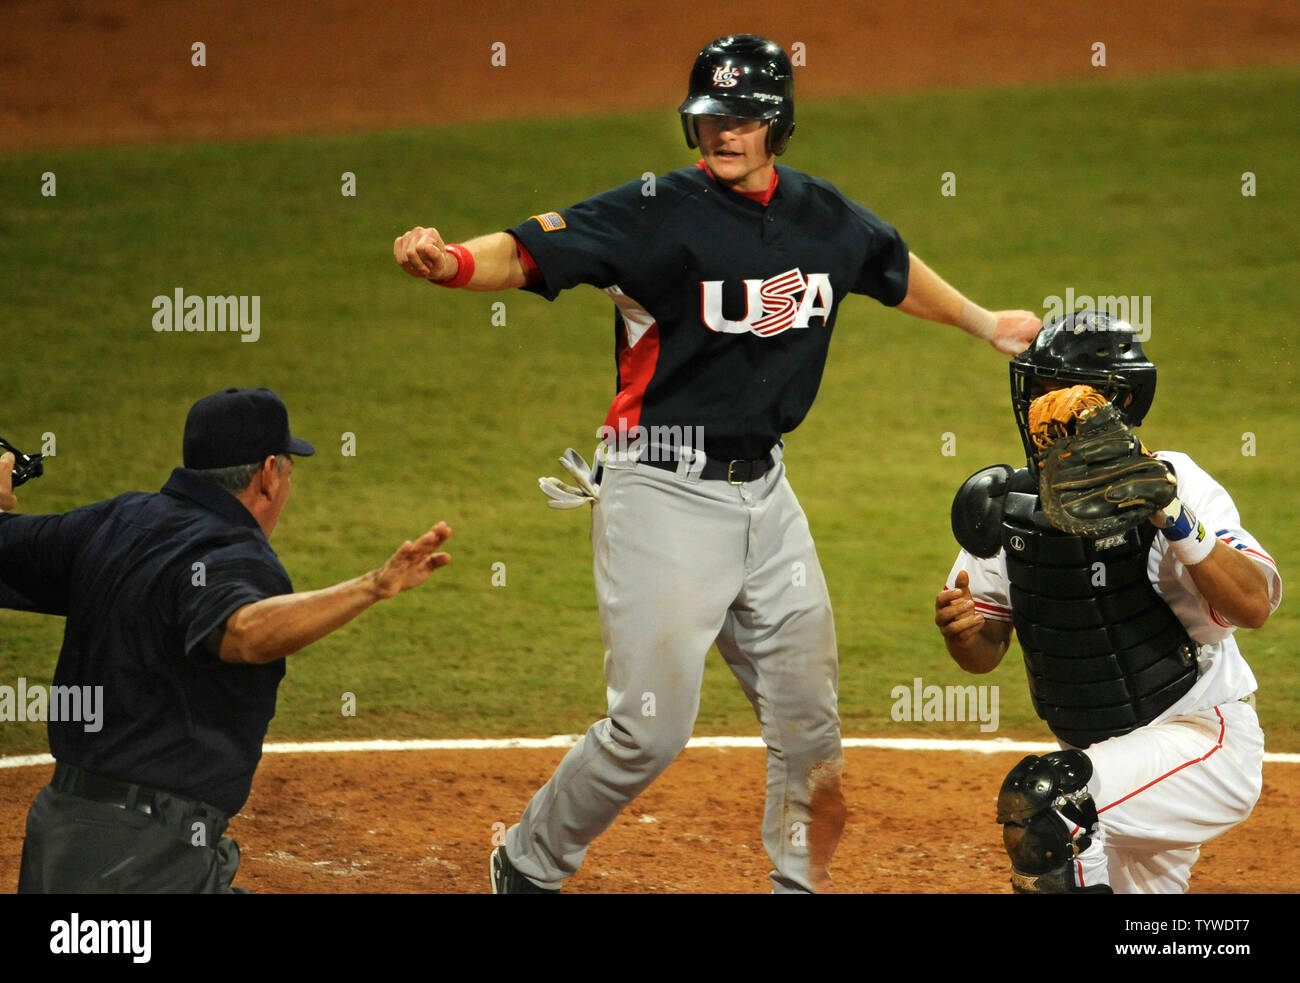 USA's Lou Marson (C) imitates umpire Juan Rodriegeuez Diaz's safe call at homeplate after he scored against Cuba's catcher Ariel Pestano during 5th inning action at Wukesong Baseball Field,  August 22, 2008, at the Summer Olympics in Beijing, China.  Cuba beat the USA team 10-2 and will face Korea for the gold medal.       (UPI Photo/Mike Theiler) Stock Photo